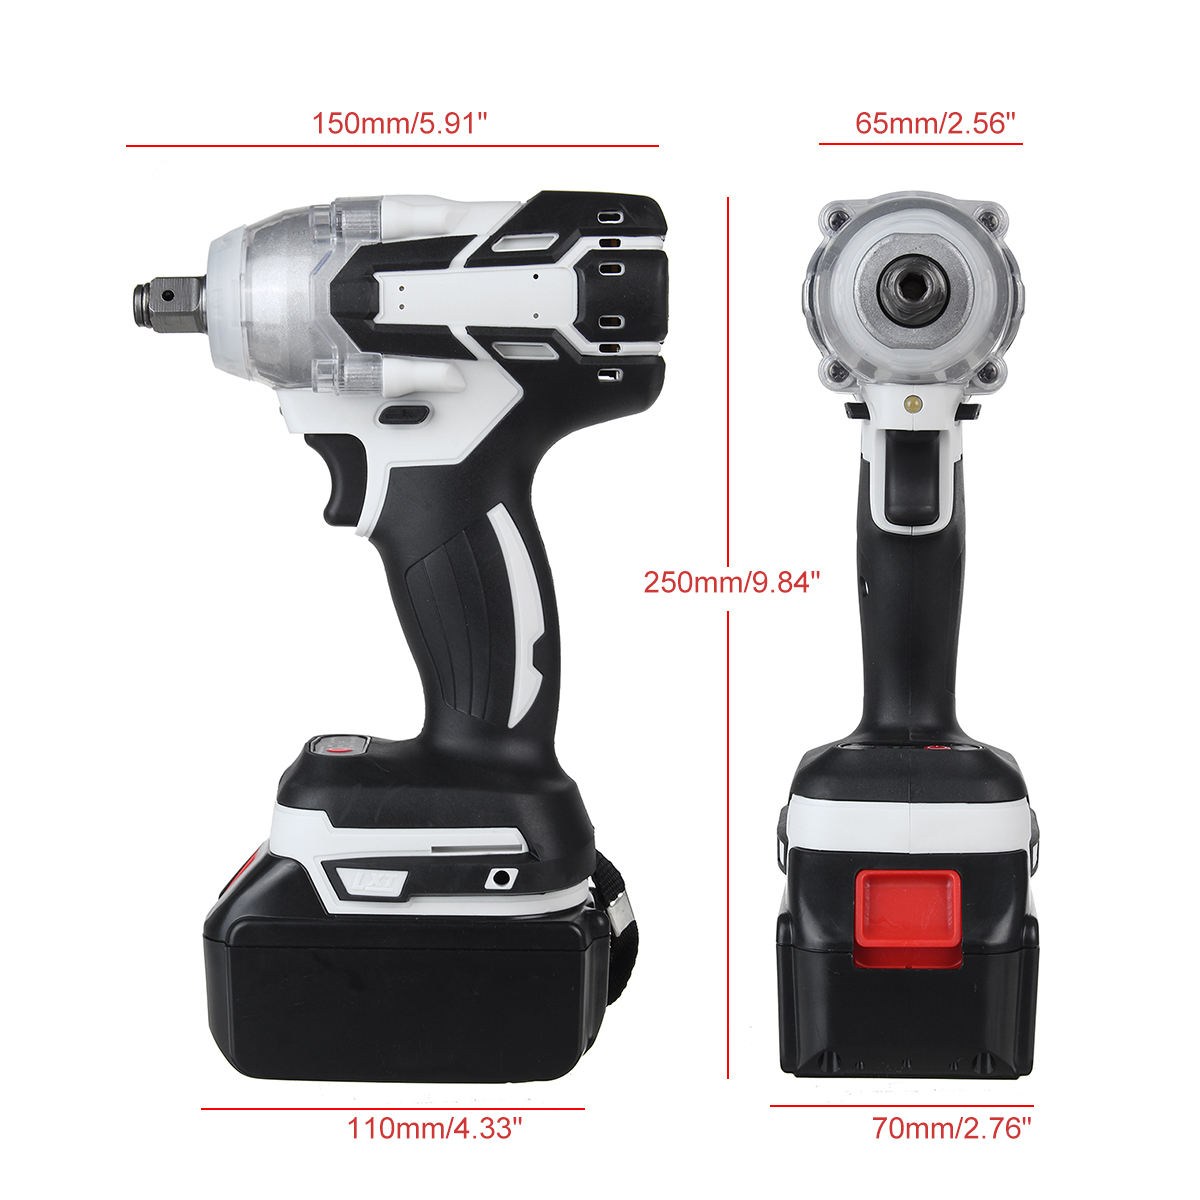 520Nm-Brushless-Cordless-Electric-Impact-Wrench-Screwdriver-Power-Tools-w-12pcs-Battery-1818080-8